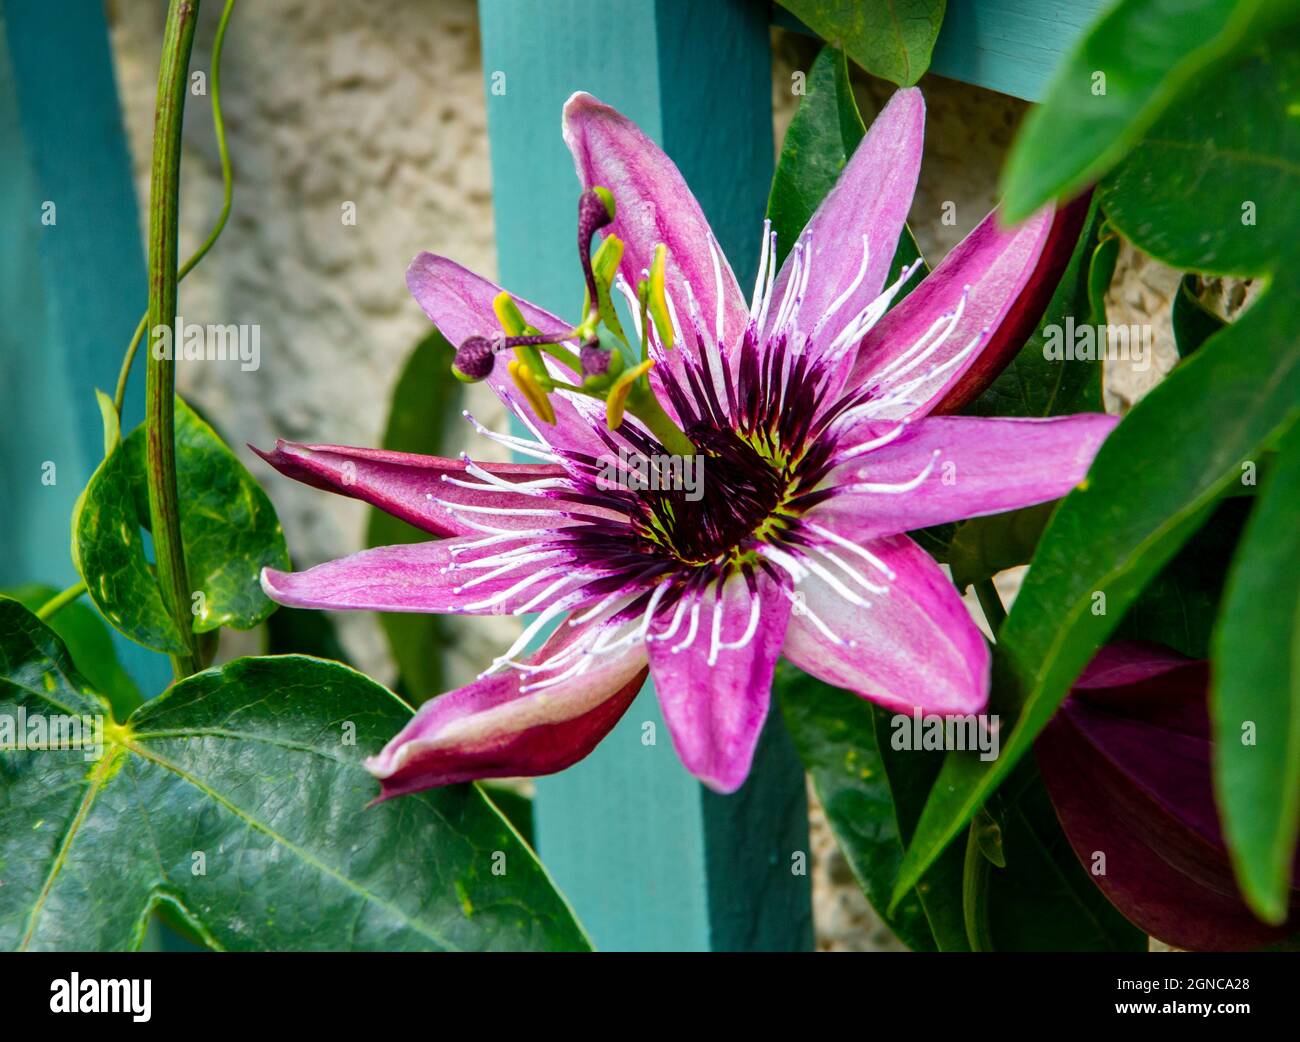 Passiflora or passion flower or passion vine, is a genus of about 550 species of flowering plants, the type genus of the family Passifloraceae. Stock Photo